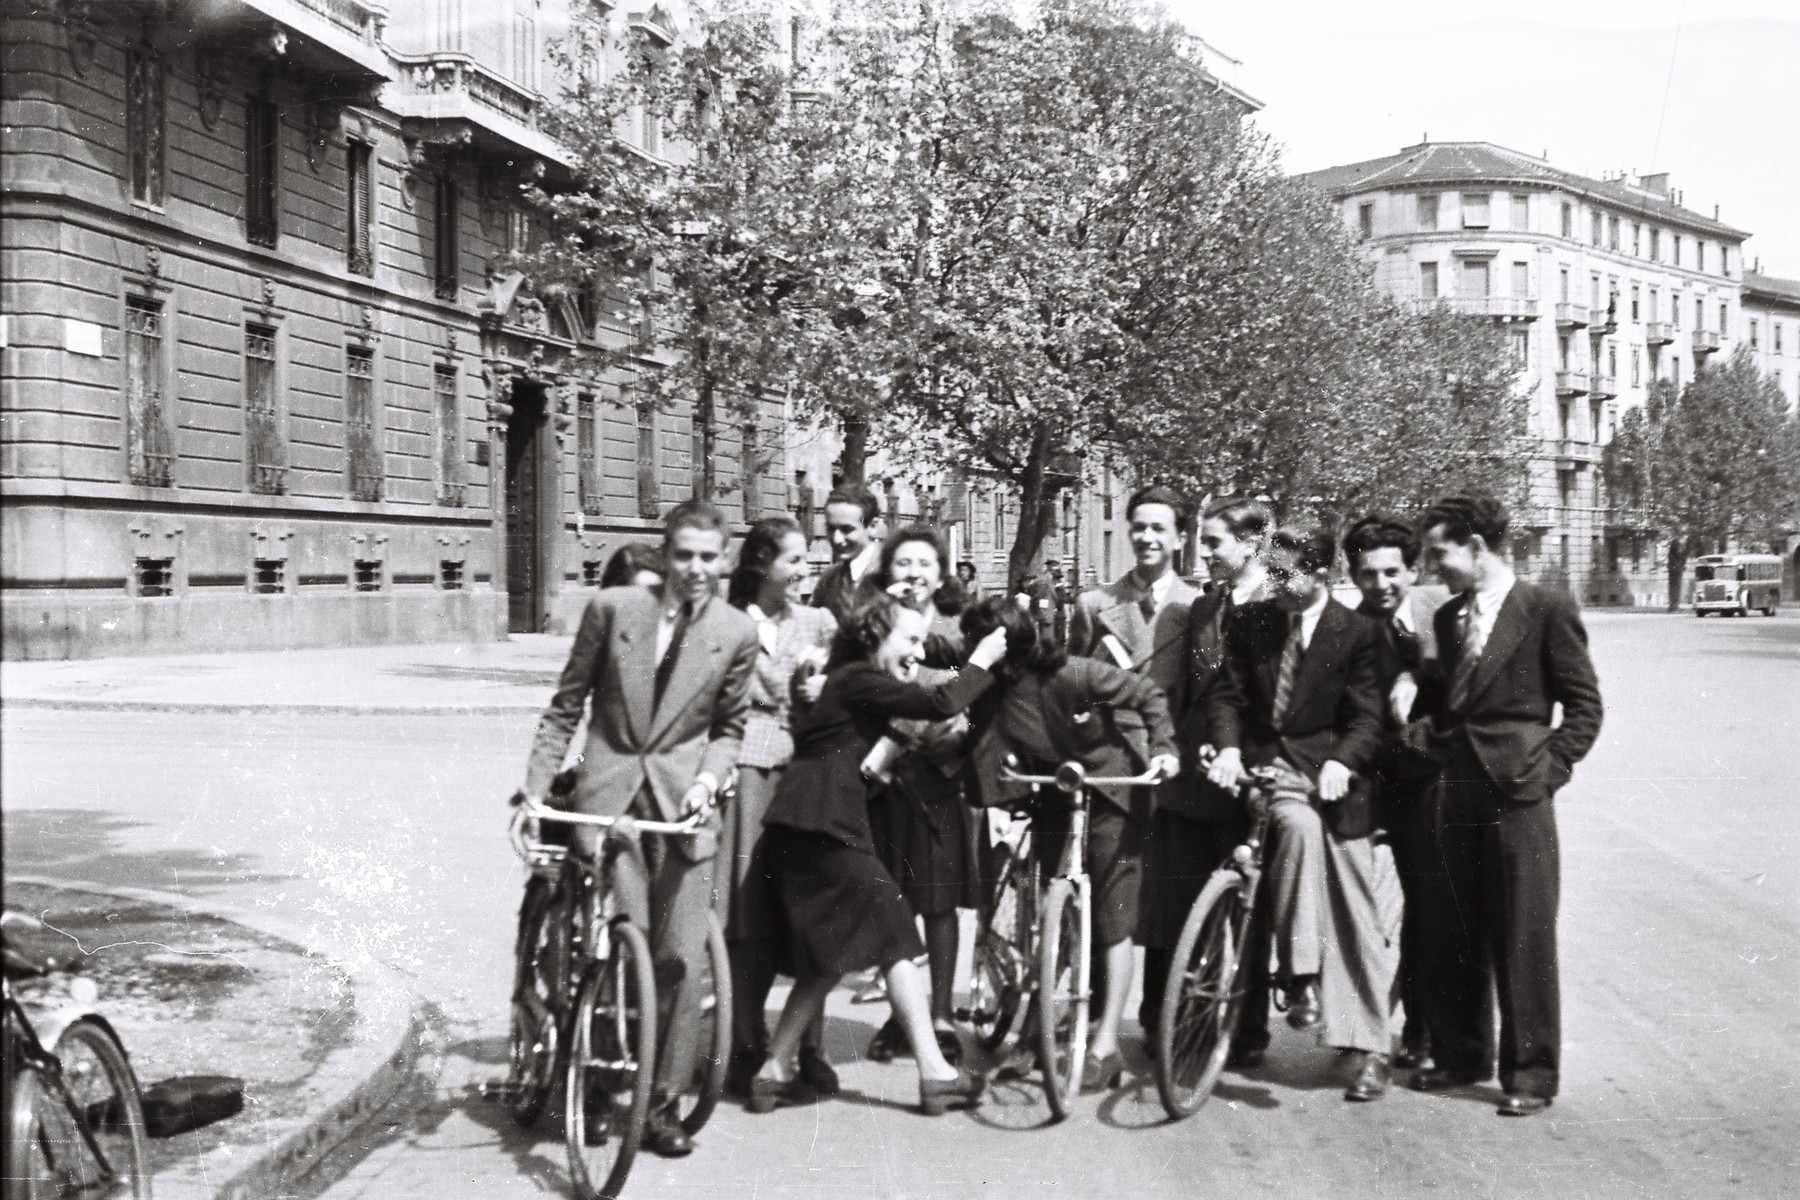 Students from the Scuolo via Eupili ride their bikes down the Via Canova while on a school trip.